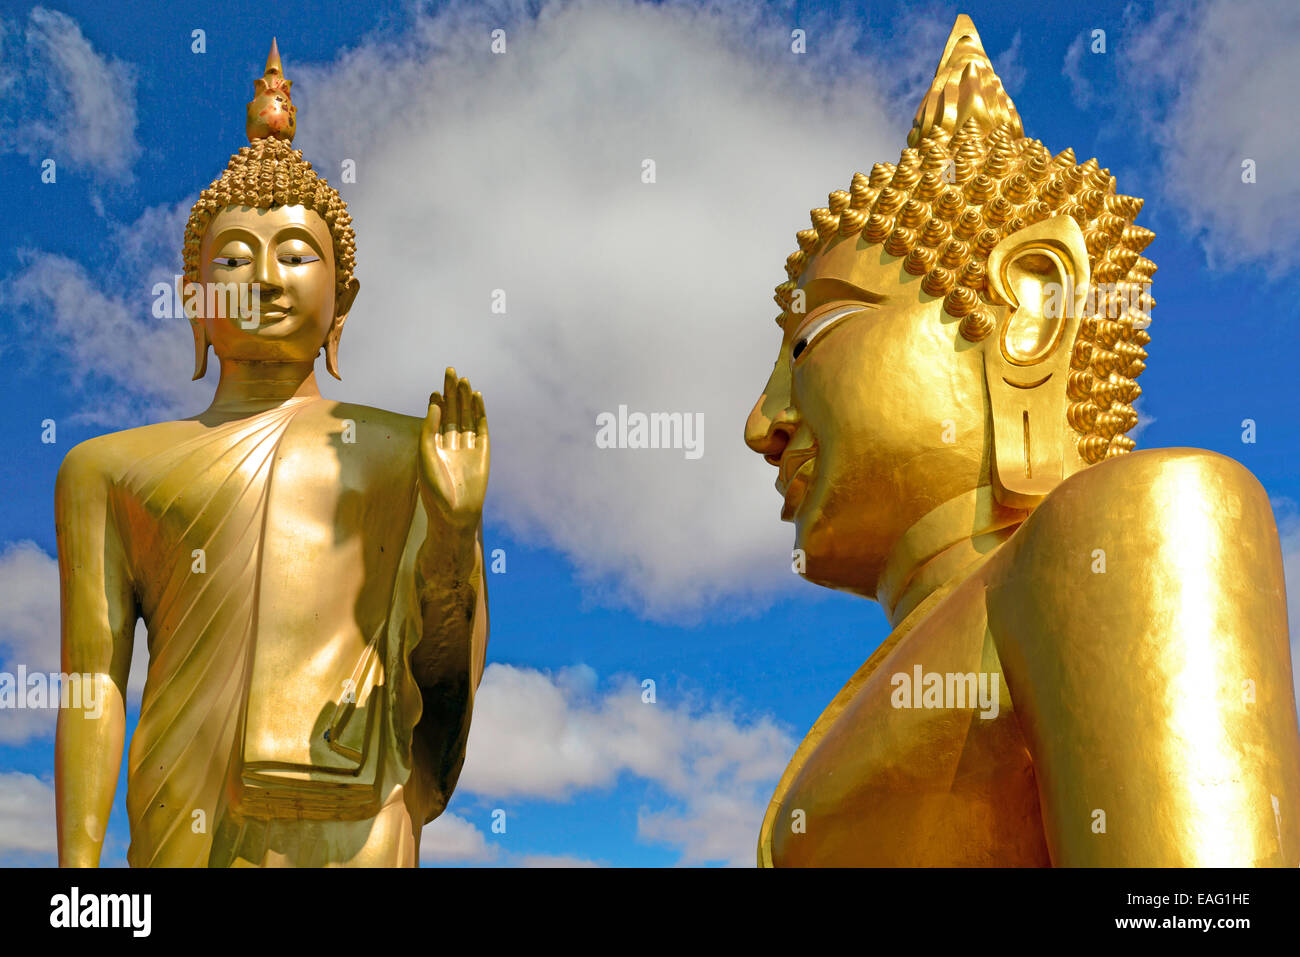 Two golden Buddhas in Thailand Stock Photo